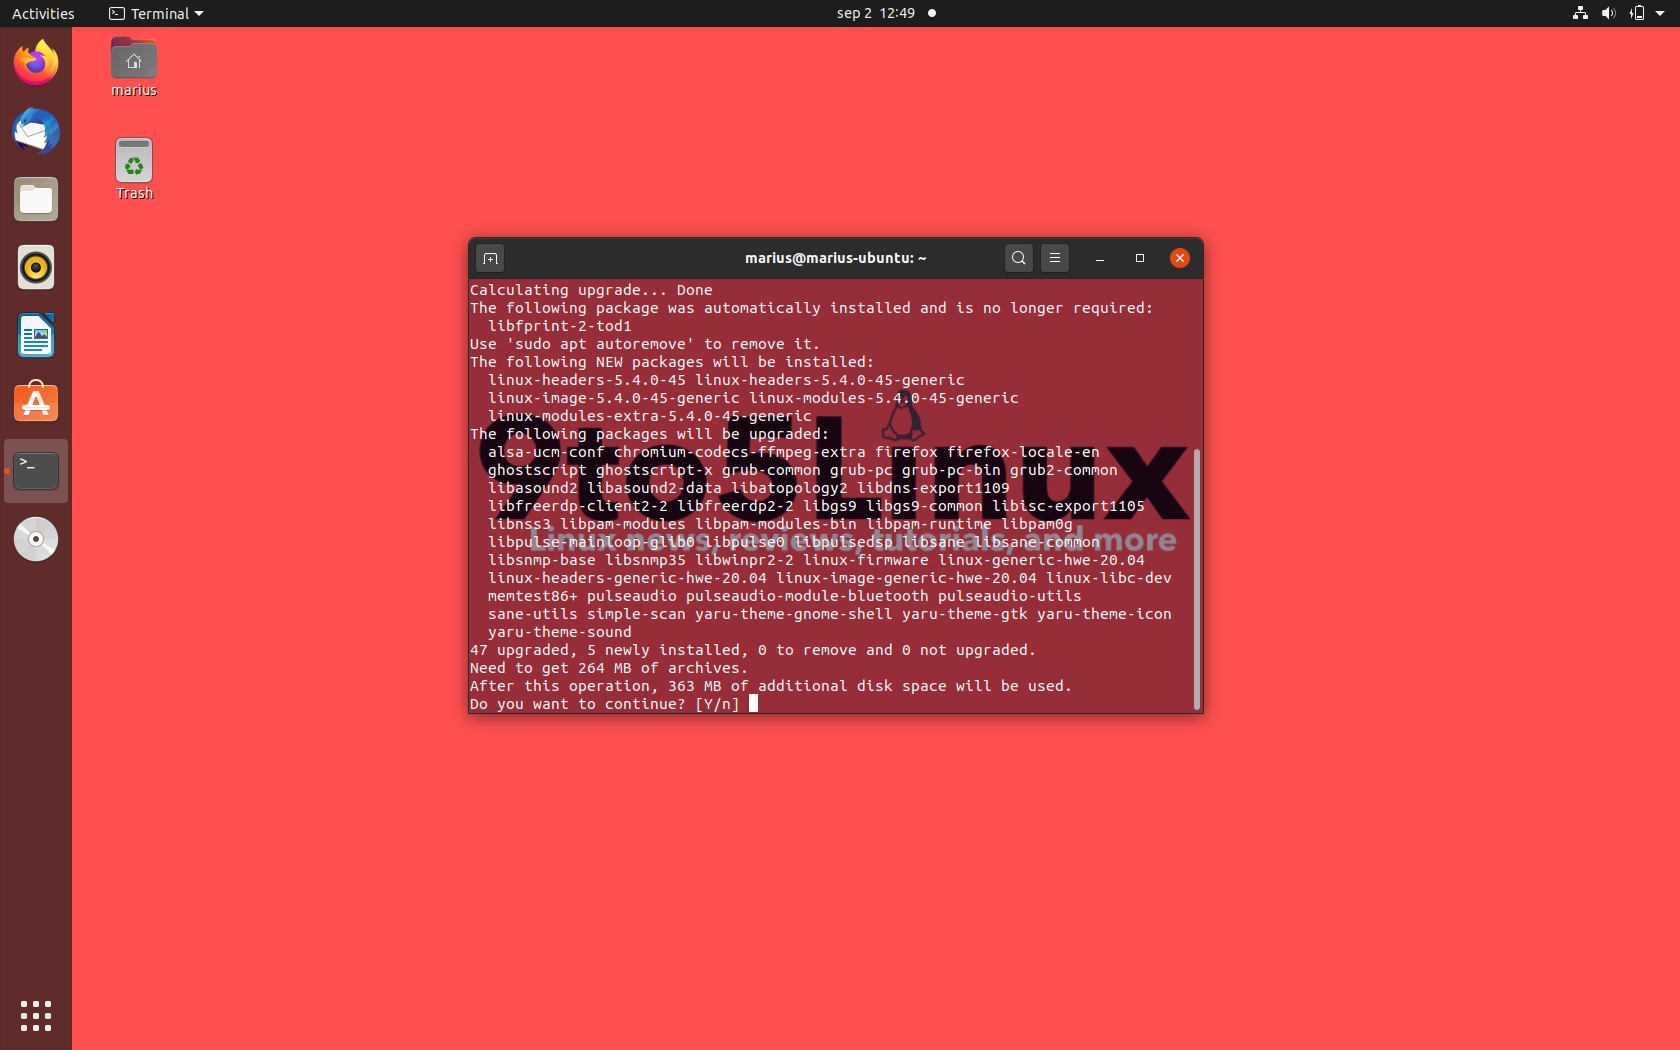 Canonical Releases Important Ubuntu Kernel Updates to Patch 17 Vulnerabilities